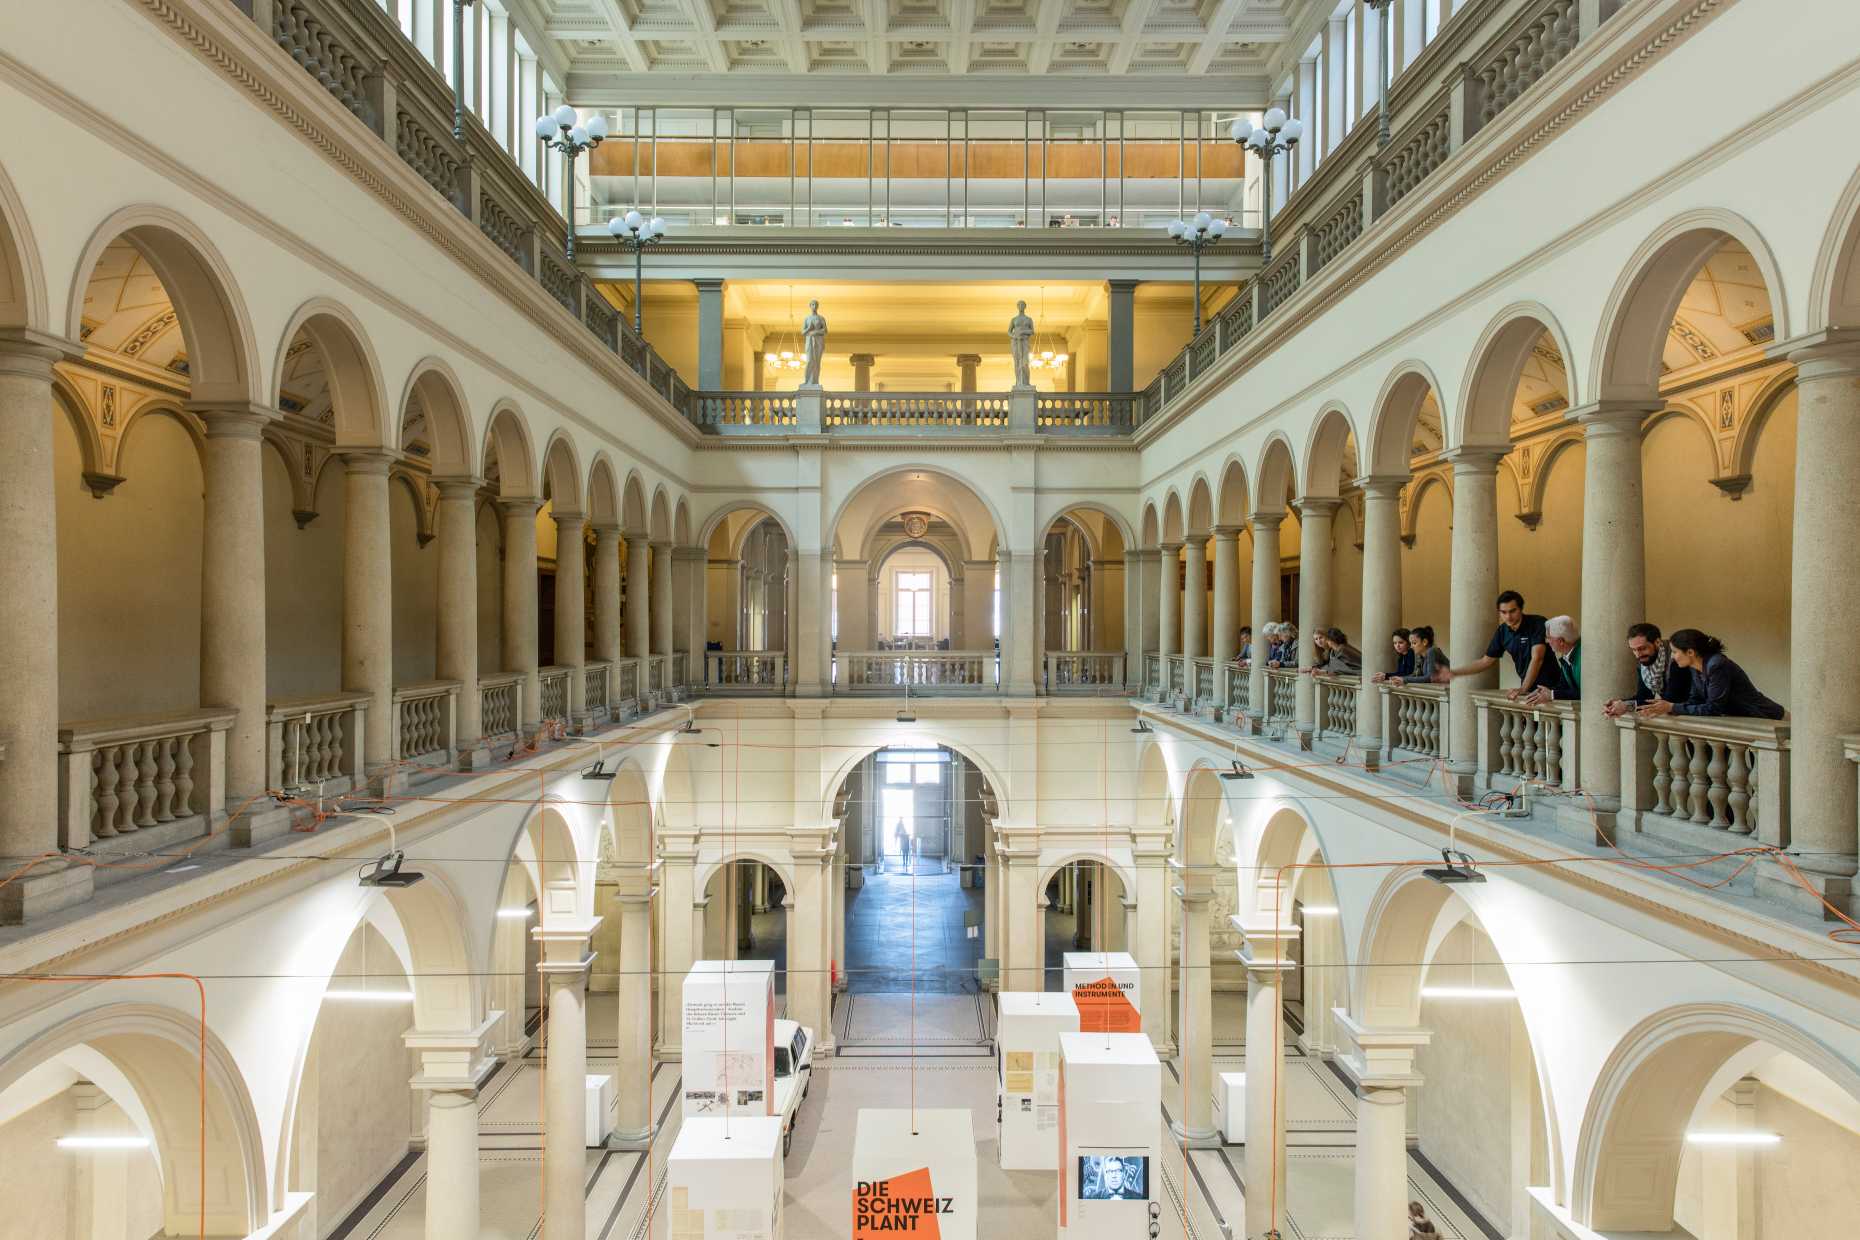 An exhibition in the ETH Main Building